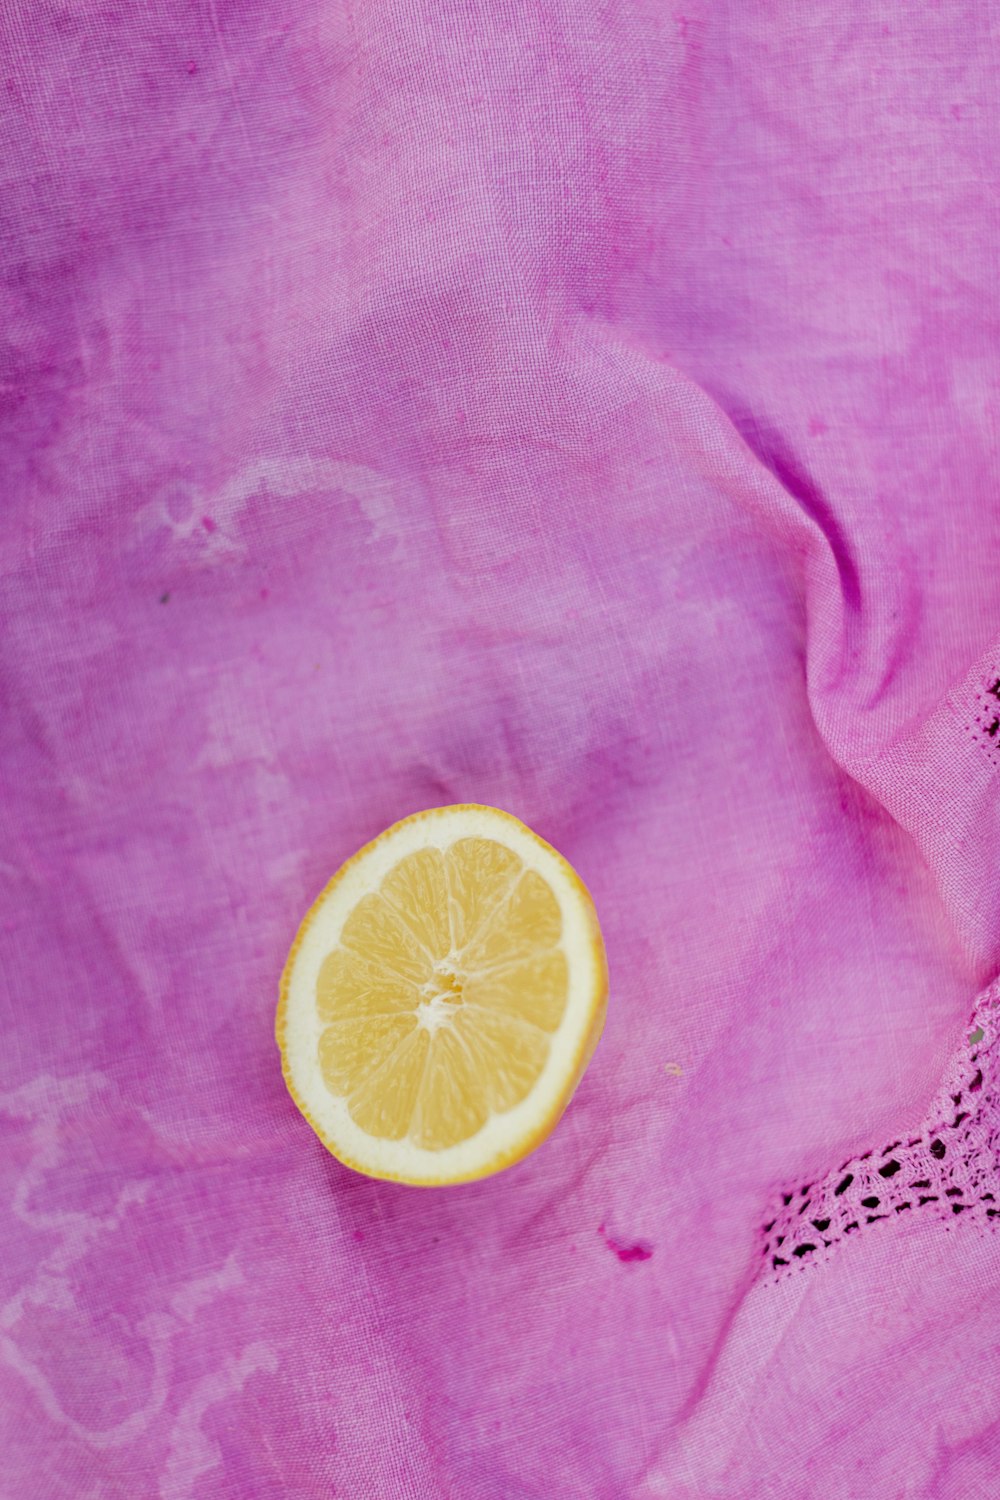 a slice of lemon sitting on top of a pink cloth